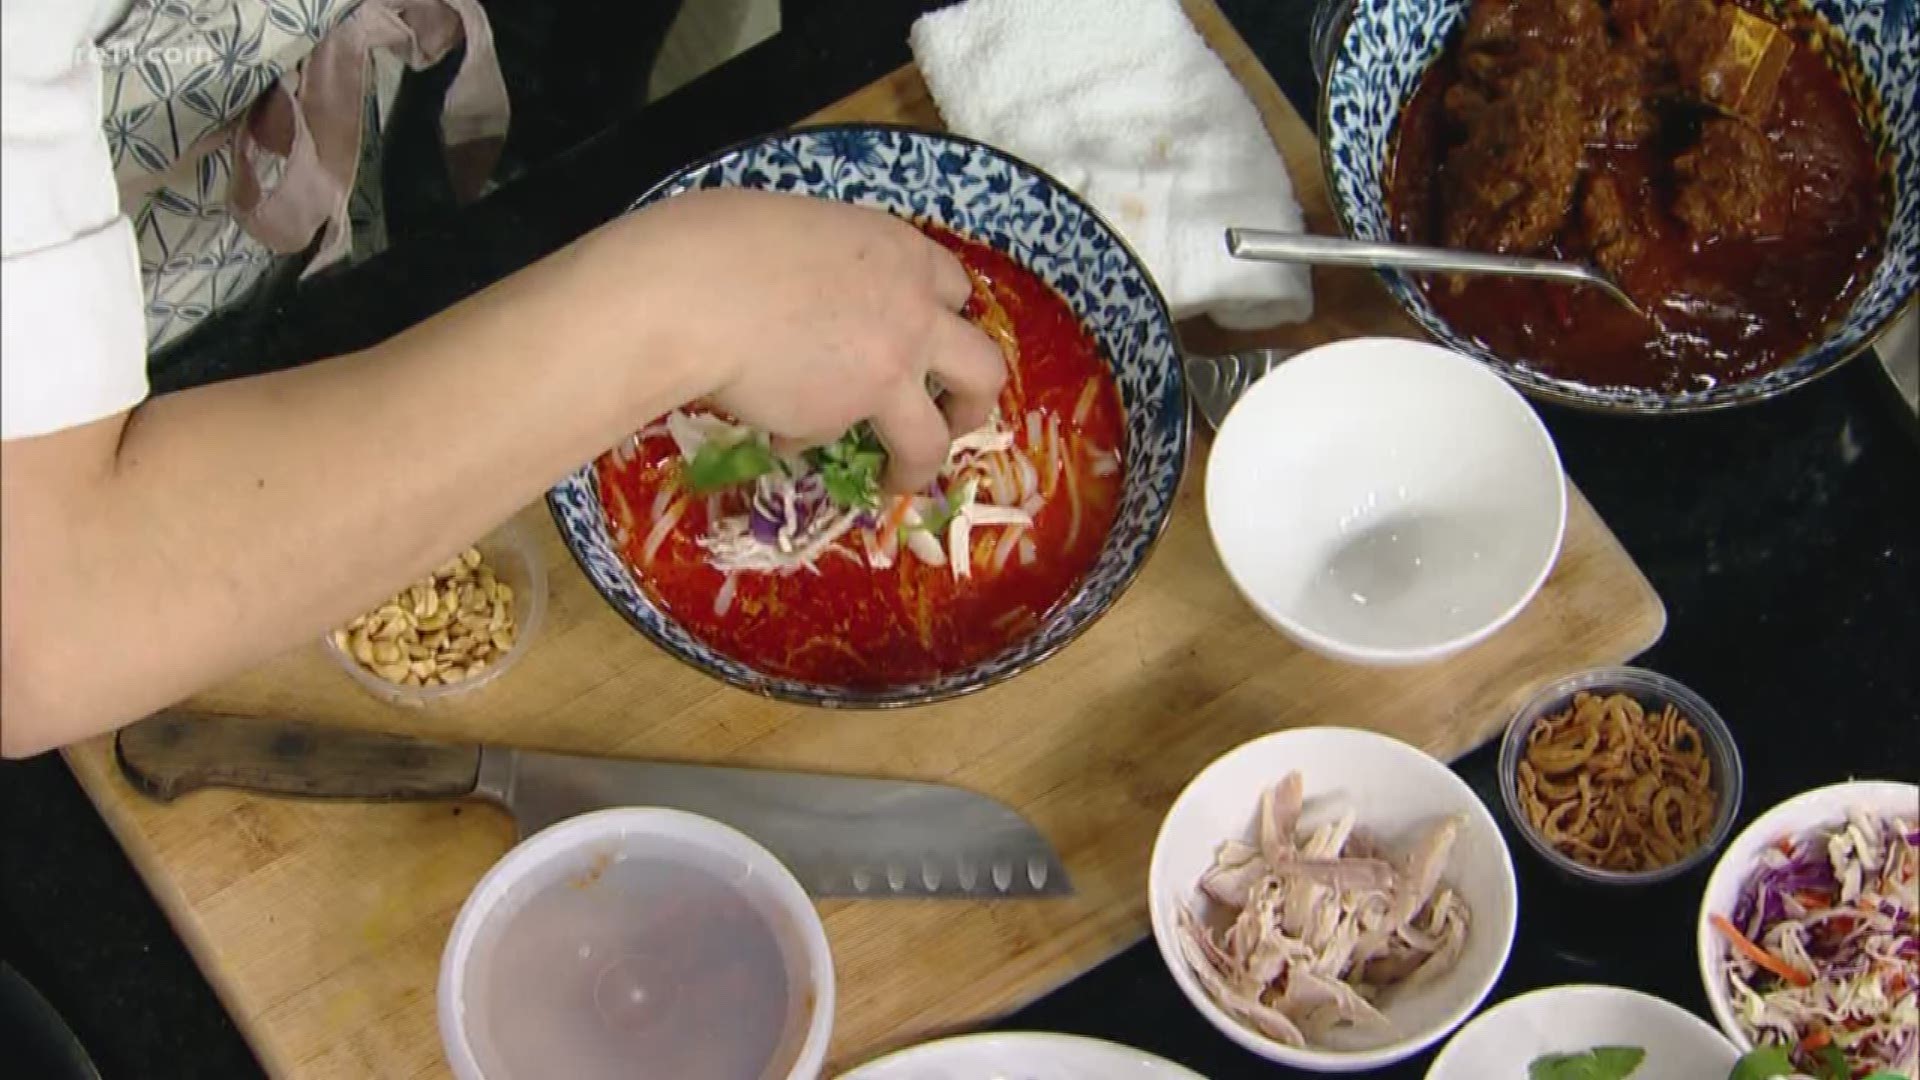 Chef Ann Ahmed from Lat 14 prepared Southeast Asian cuisine on KARE 11 Saturday. A recipe of her rice pudding can be found here: https://www.kare11.com/article/life/food/recipes/recipe-rice-pudding-from-lat-14/89-153addb8-49d0-4587-b669-83663b05fe90